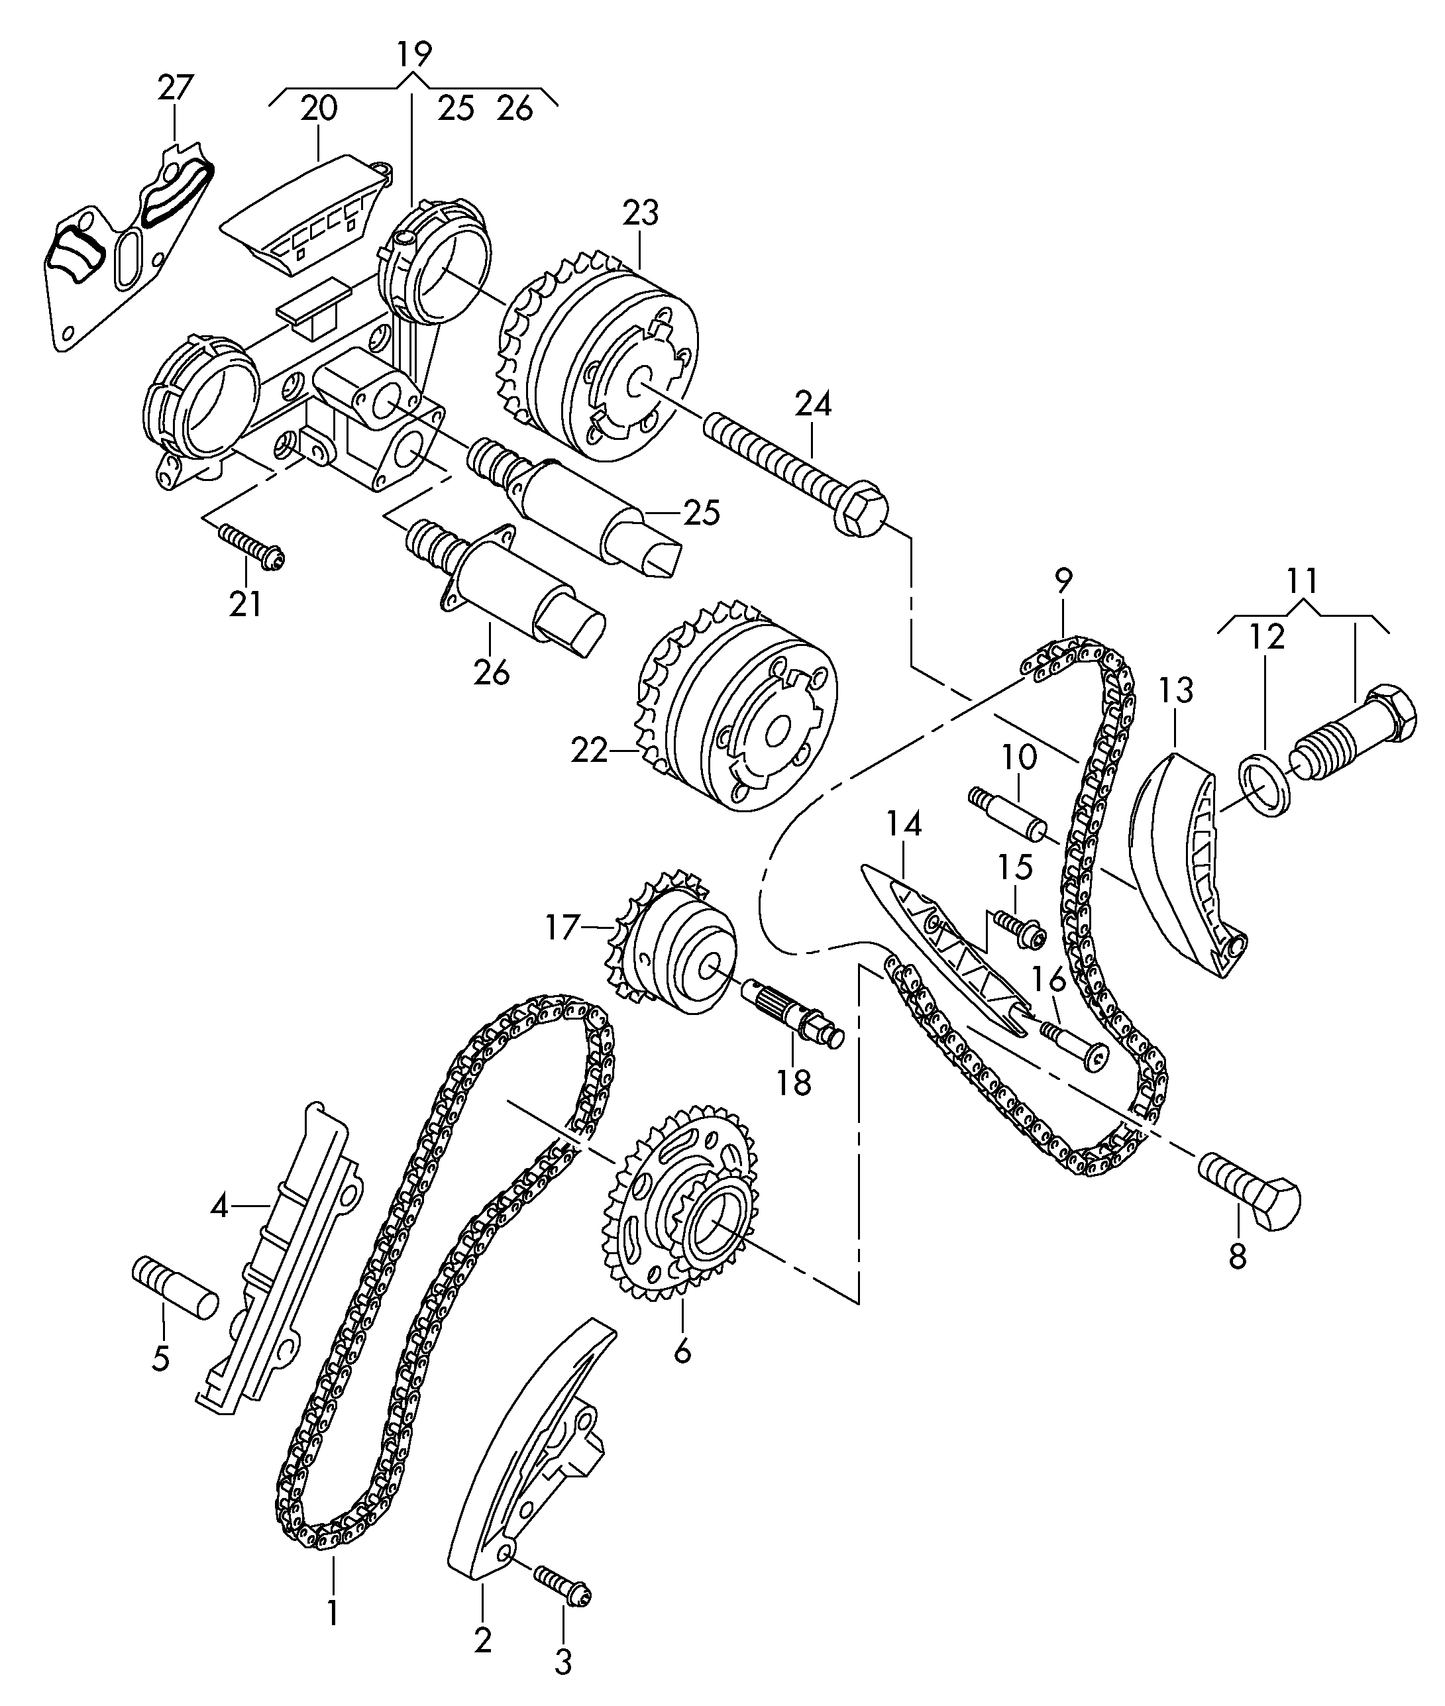 (1) 108707KP1 FEBI/FAI Timing Chain Kit for camshaft, with guide rails and chain tensioner ‘please contact VWS for availability before ordering’